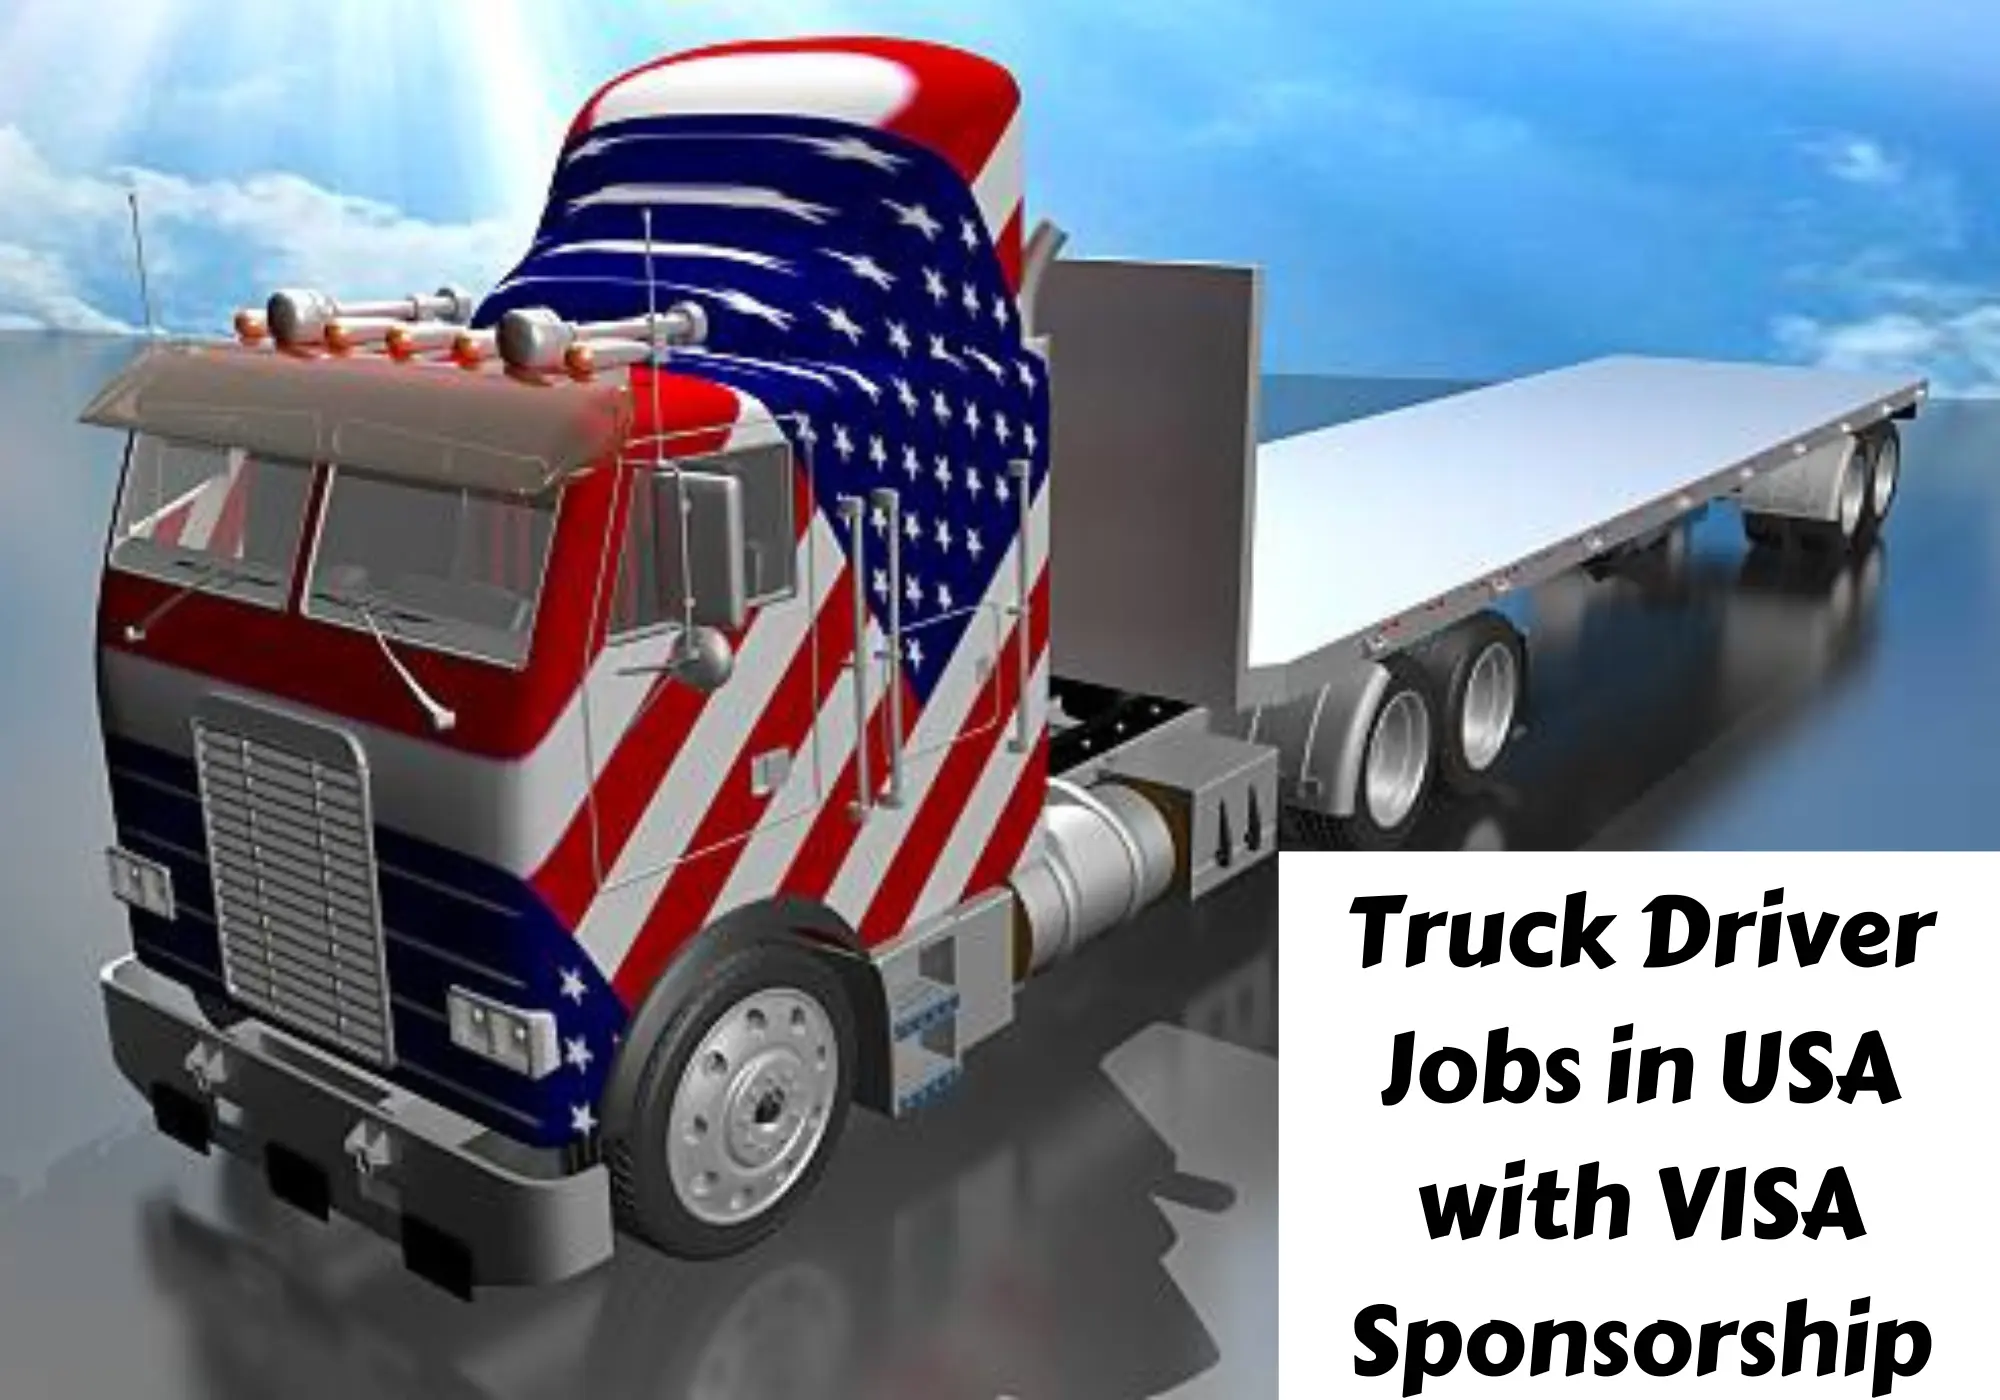 Truck Driver Jobs in USA with VISA Sponsorship